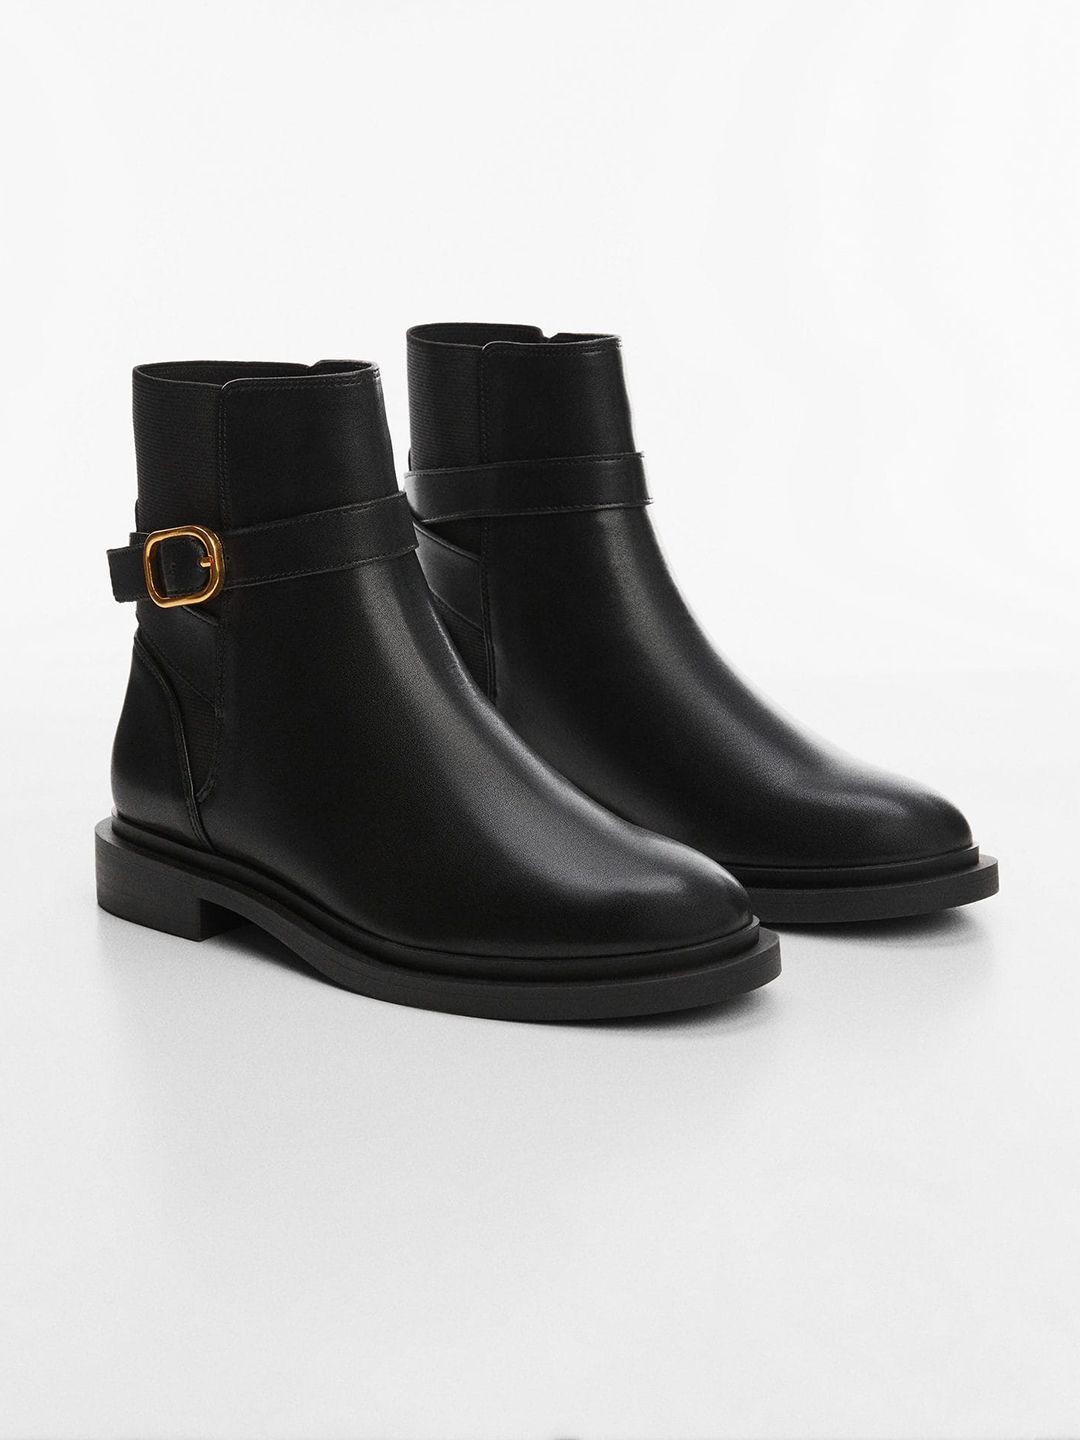 mango-women-mid-top-chelsea-boot-with-buckle-detail